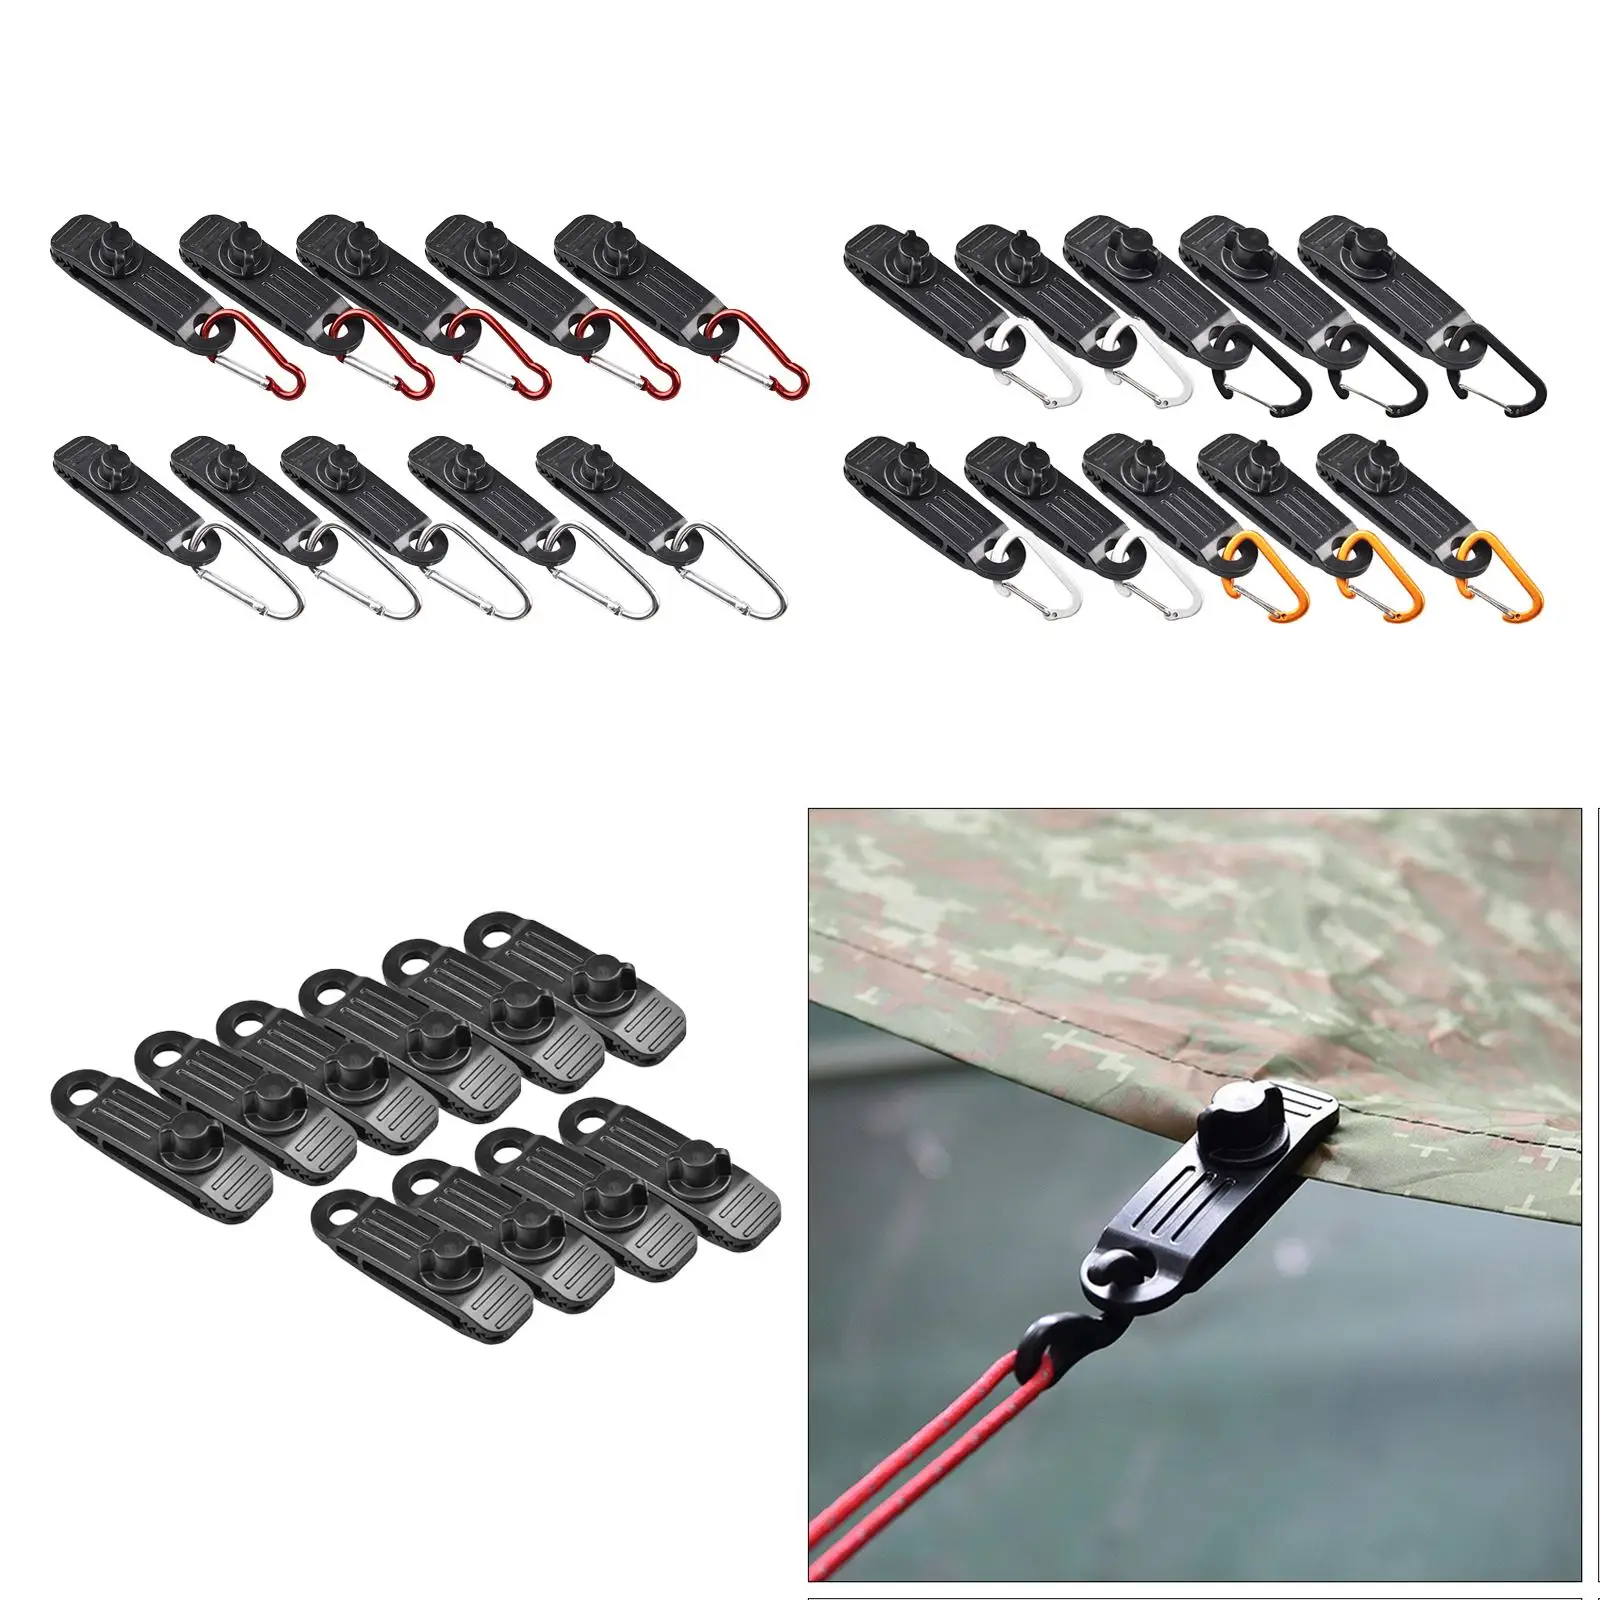 10x Heavy Duty Tent Snap Clamp Tighten Canopy Fasteners handle type lock with Buckles Te Clip